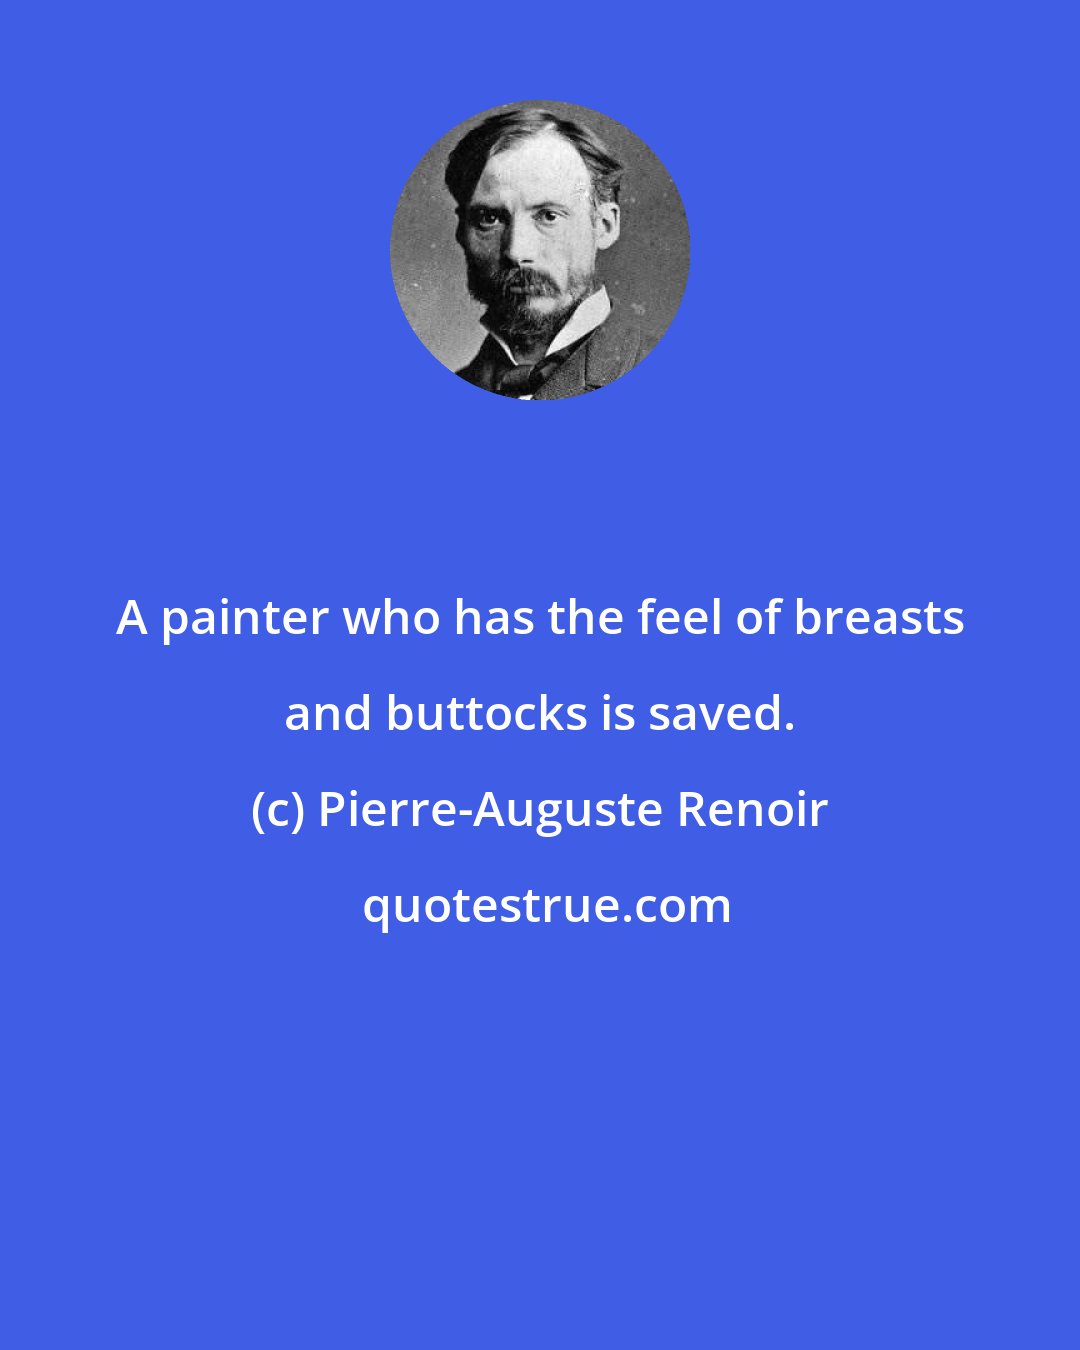 Pierre-Auguste Renoir: A painter who has the feel of breasts and buttocks is saved.